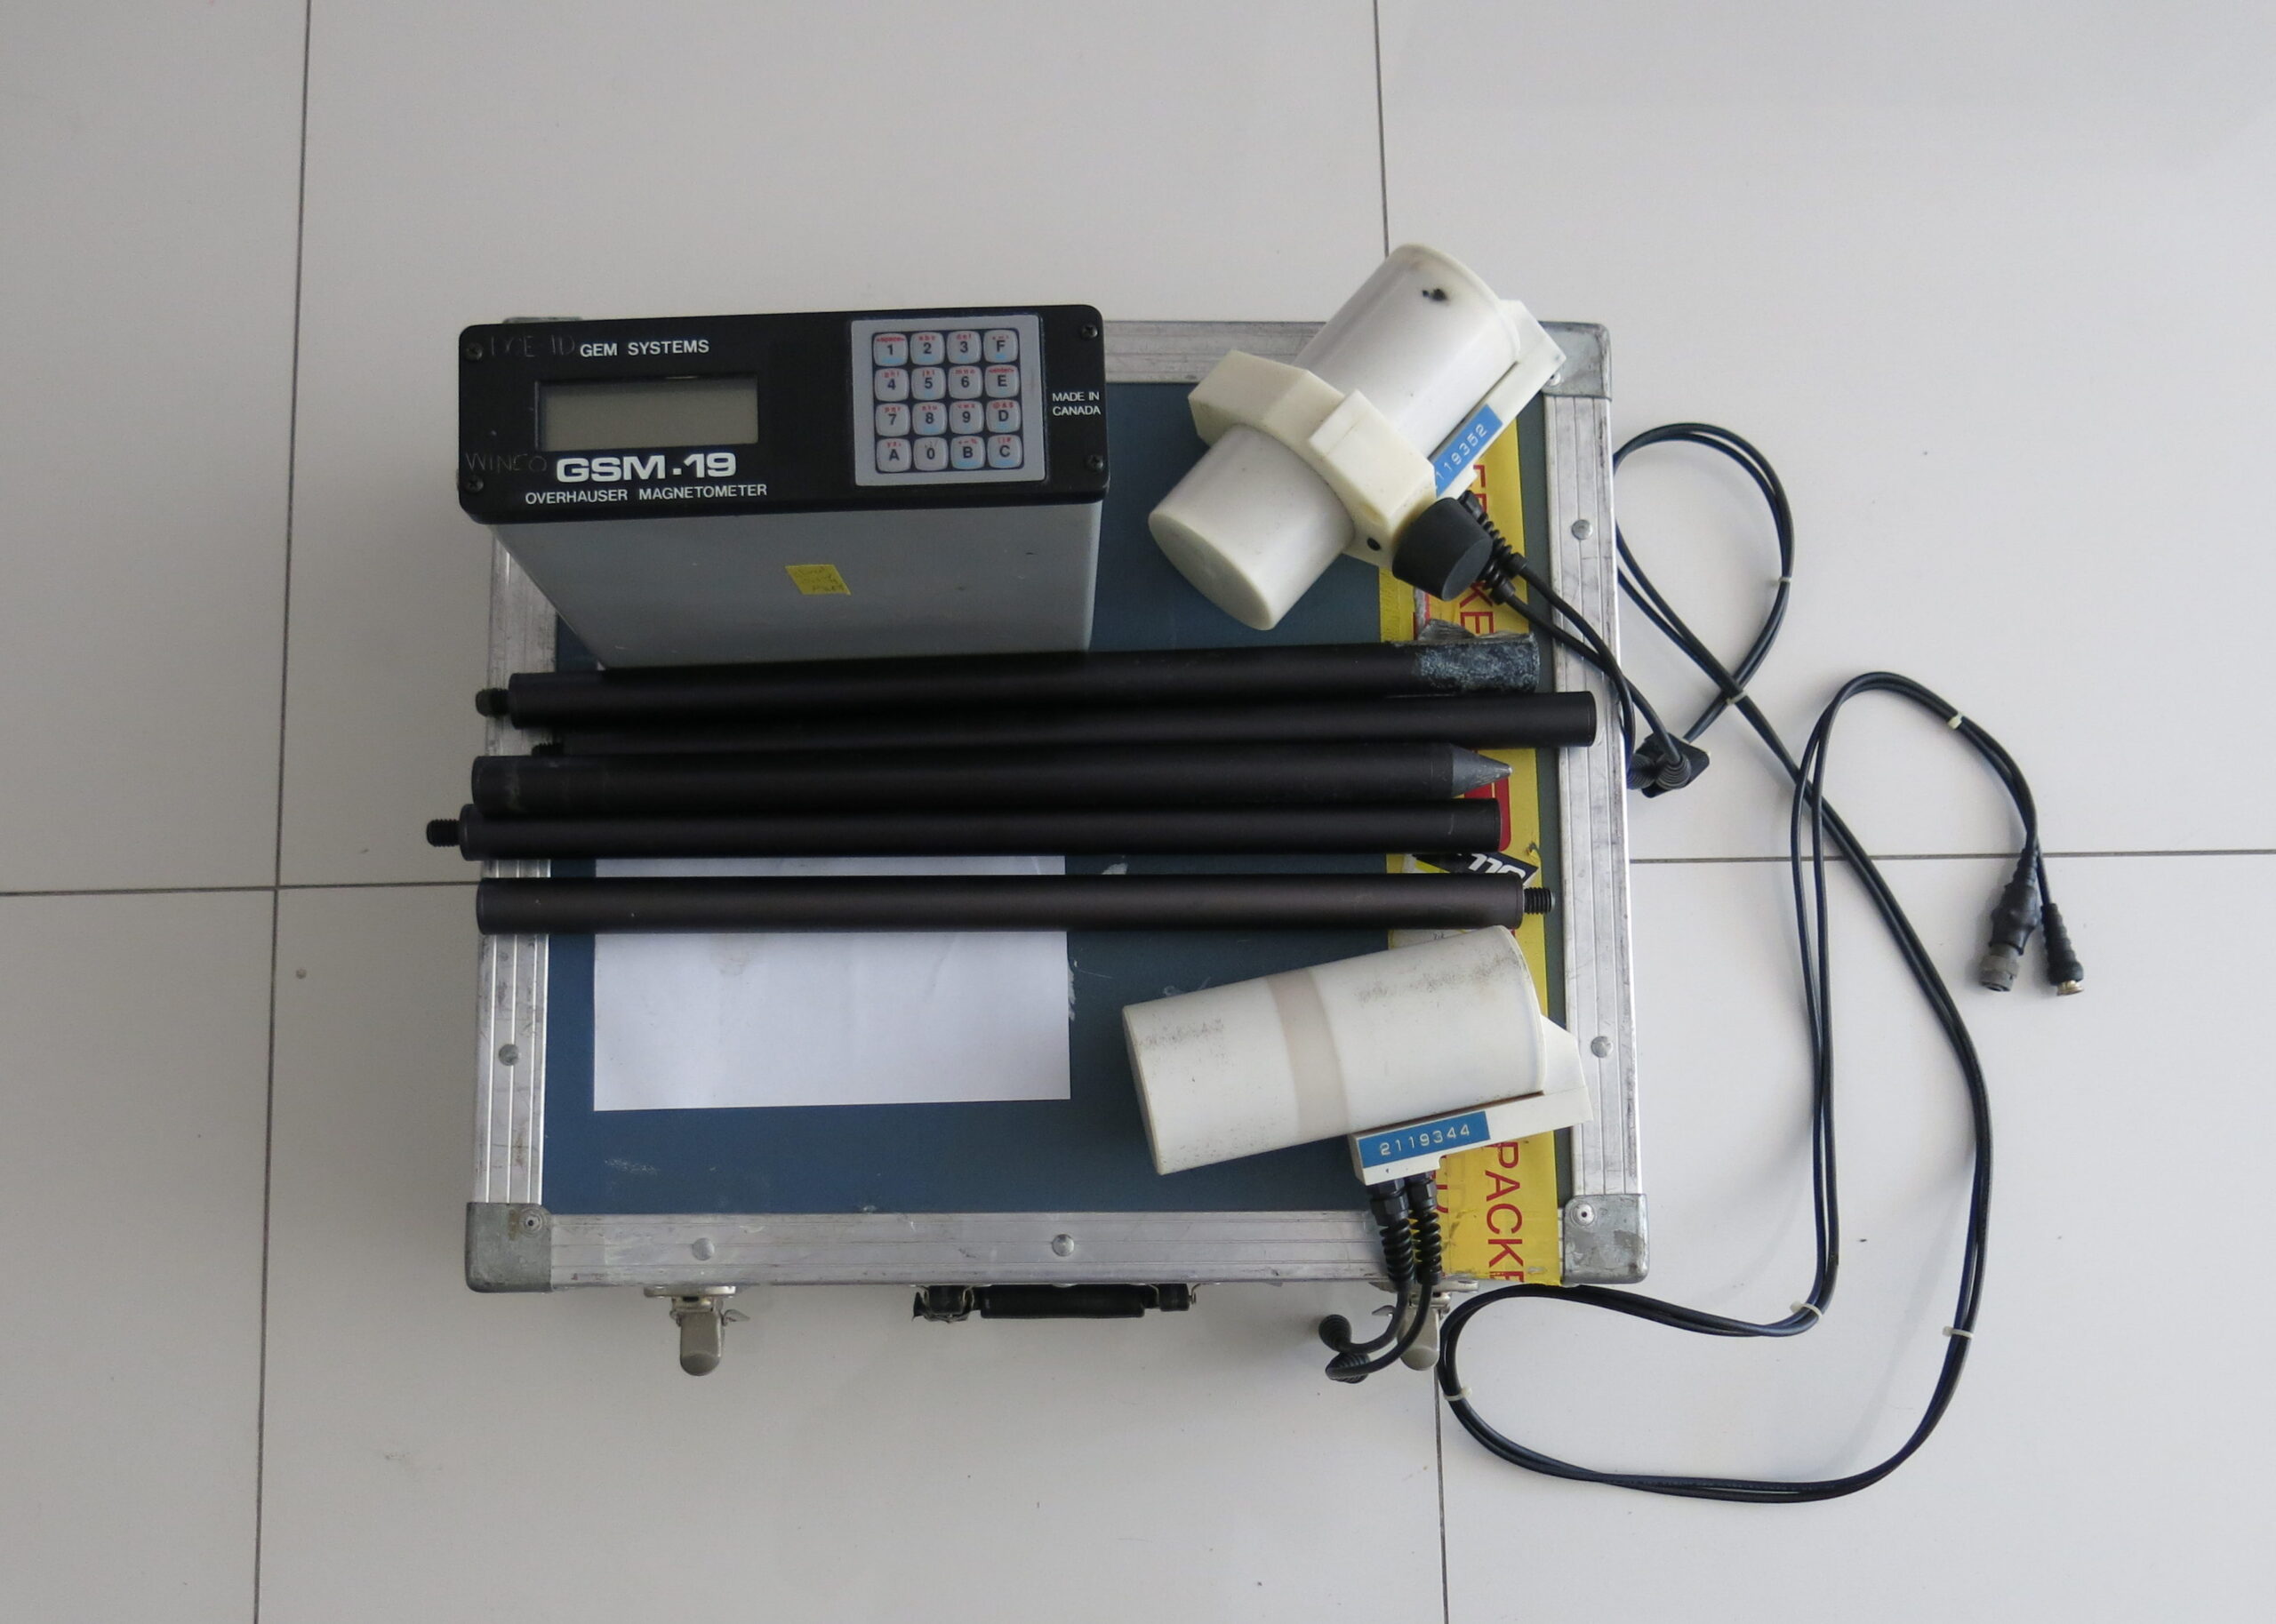 Used Overhauser magnetometer for sale (SOLD)